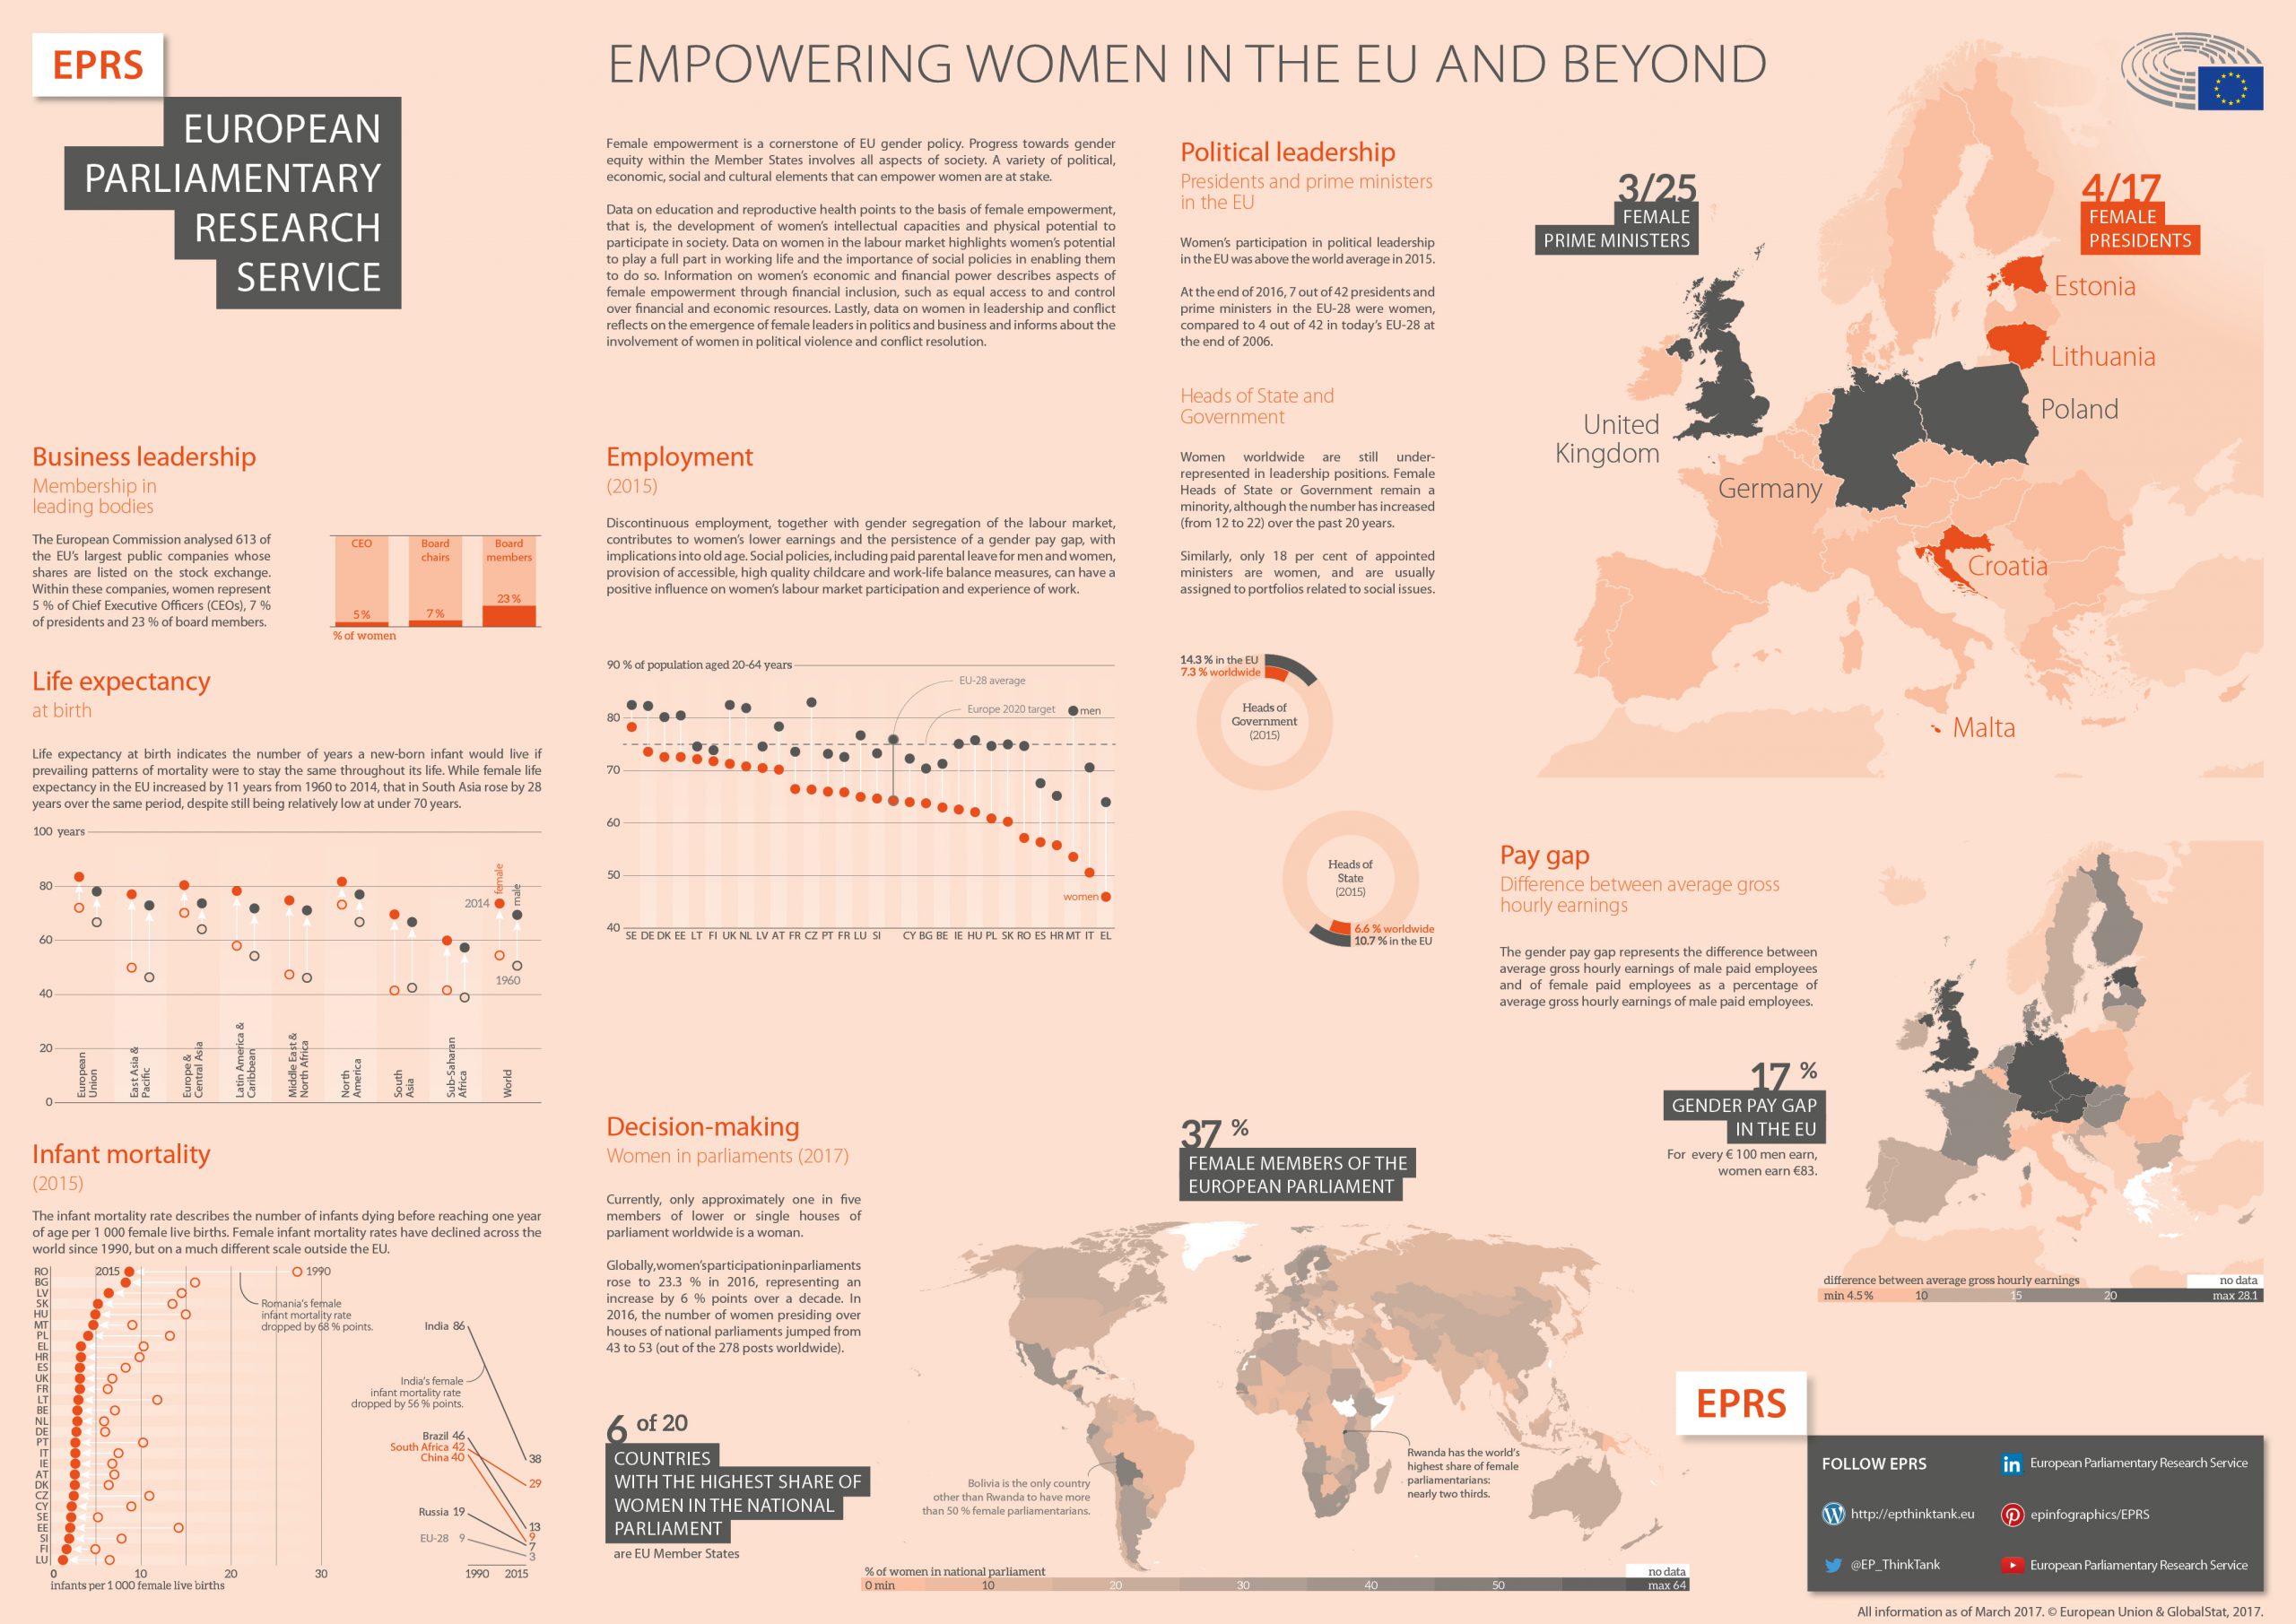 International Women’s Day 2017 – Empowering women in the EU and beyond